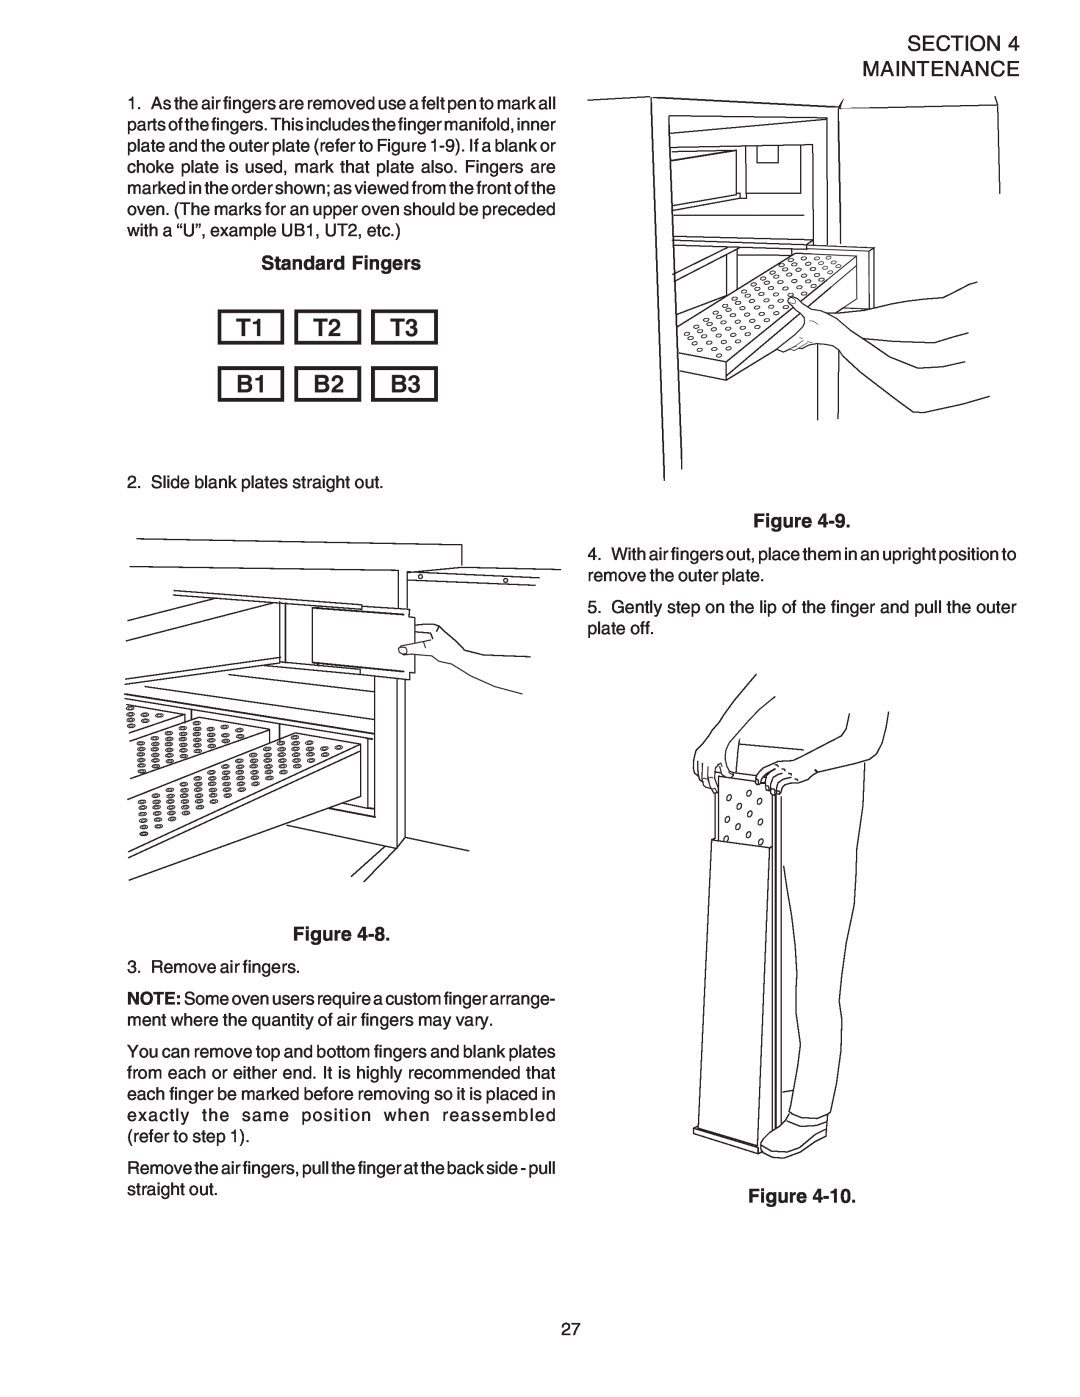 Middleby Marshall PS520 installation manual T1 T2 T3 B1 B2 B3, Section Maintenance, Standard Fingers, Figure 